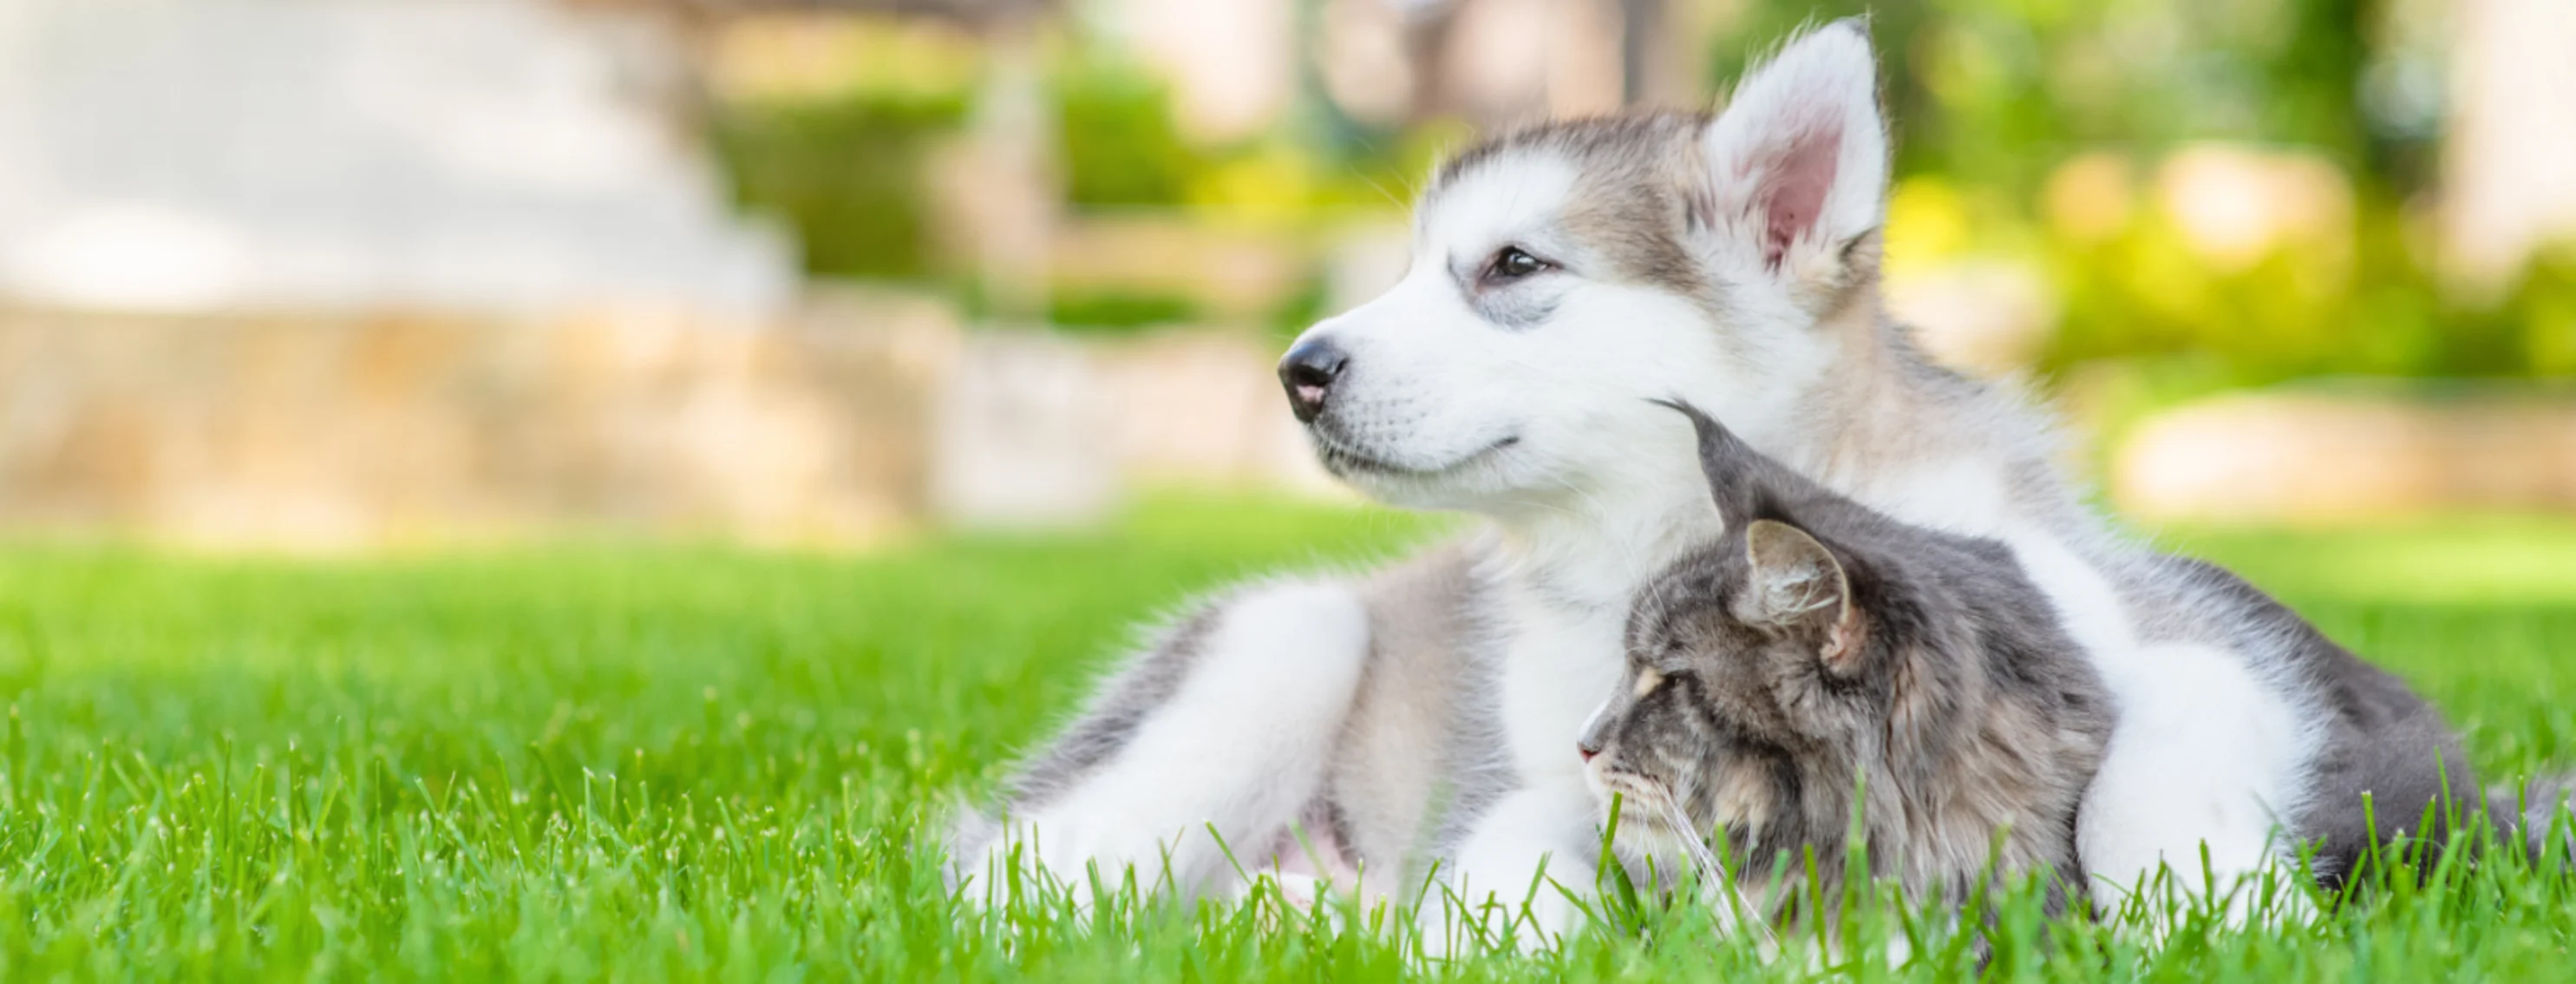 Husky puppy and gray cat laying in grass